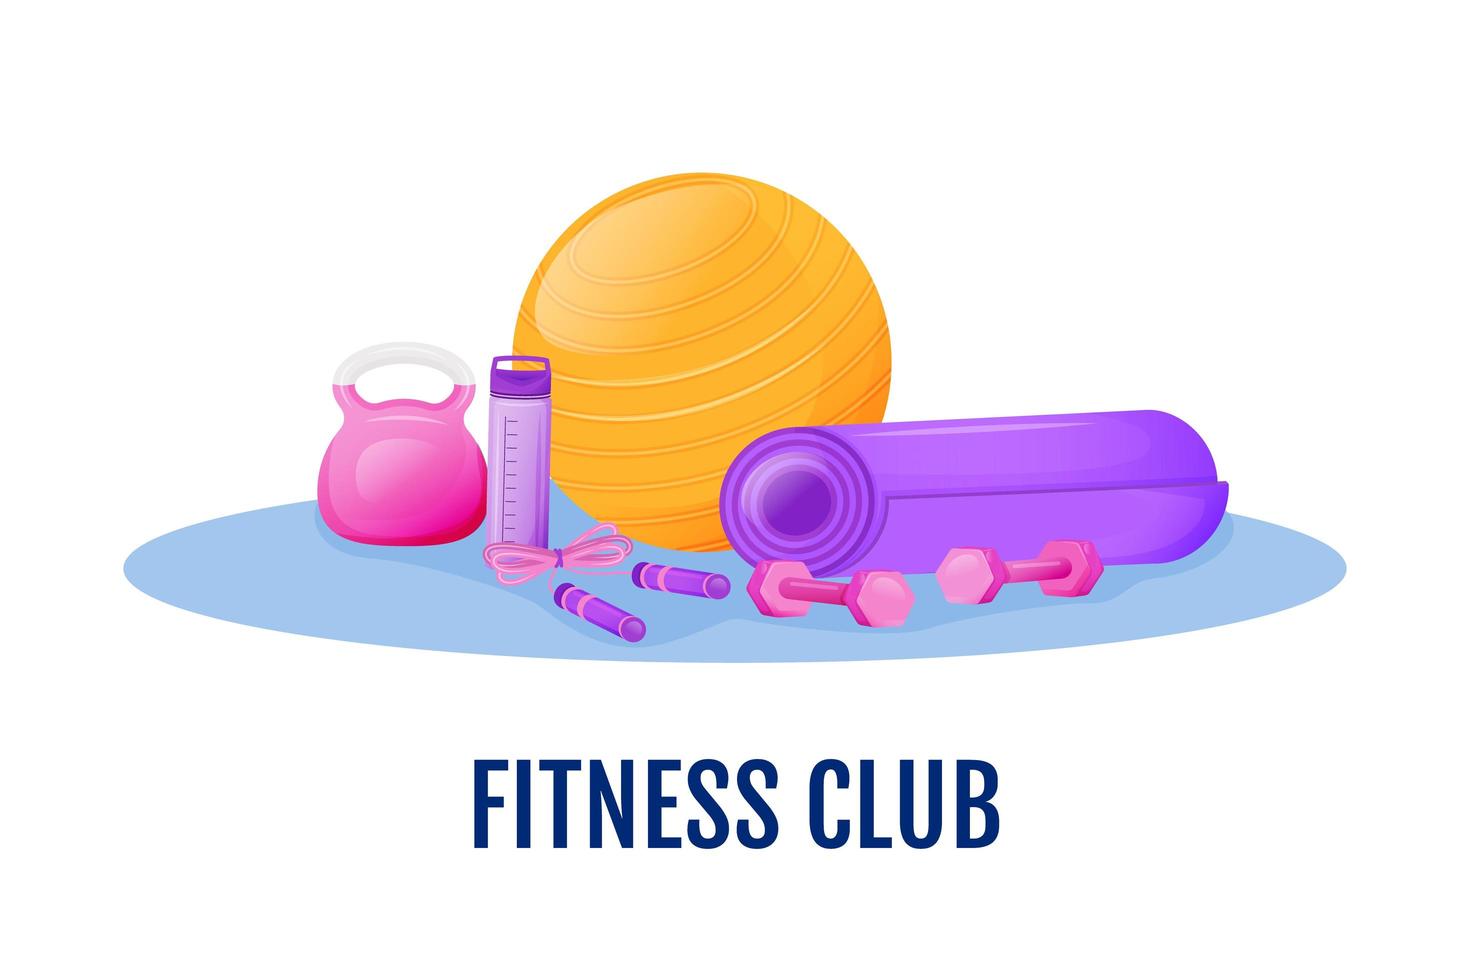 Fitness club objects vector